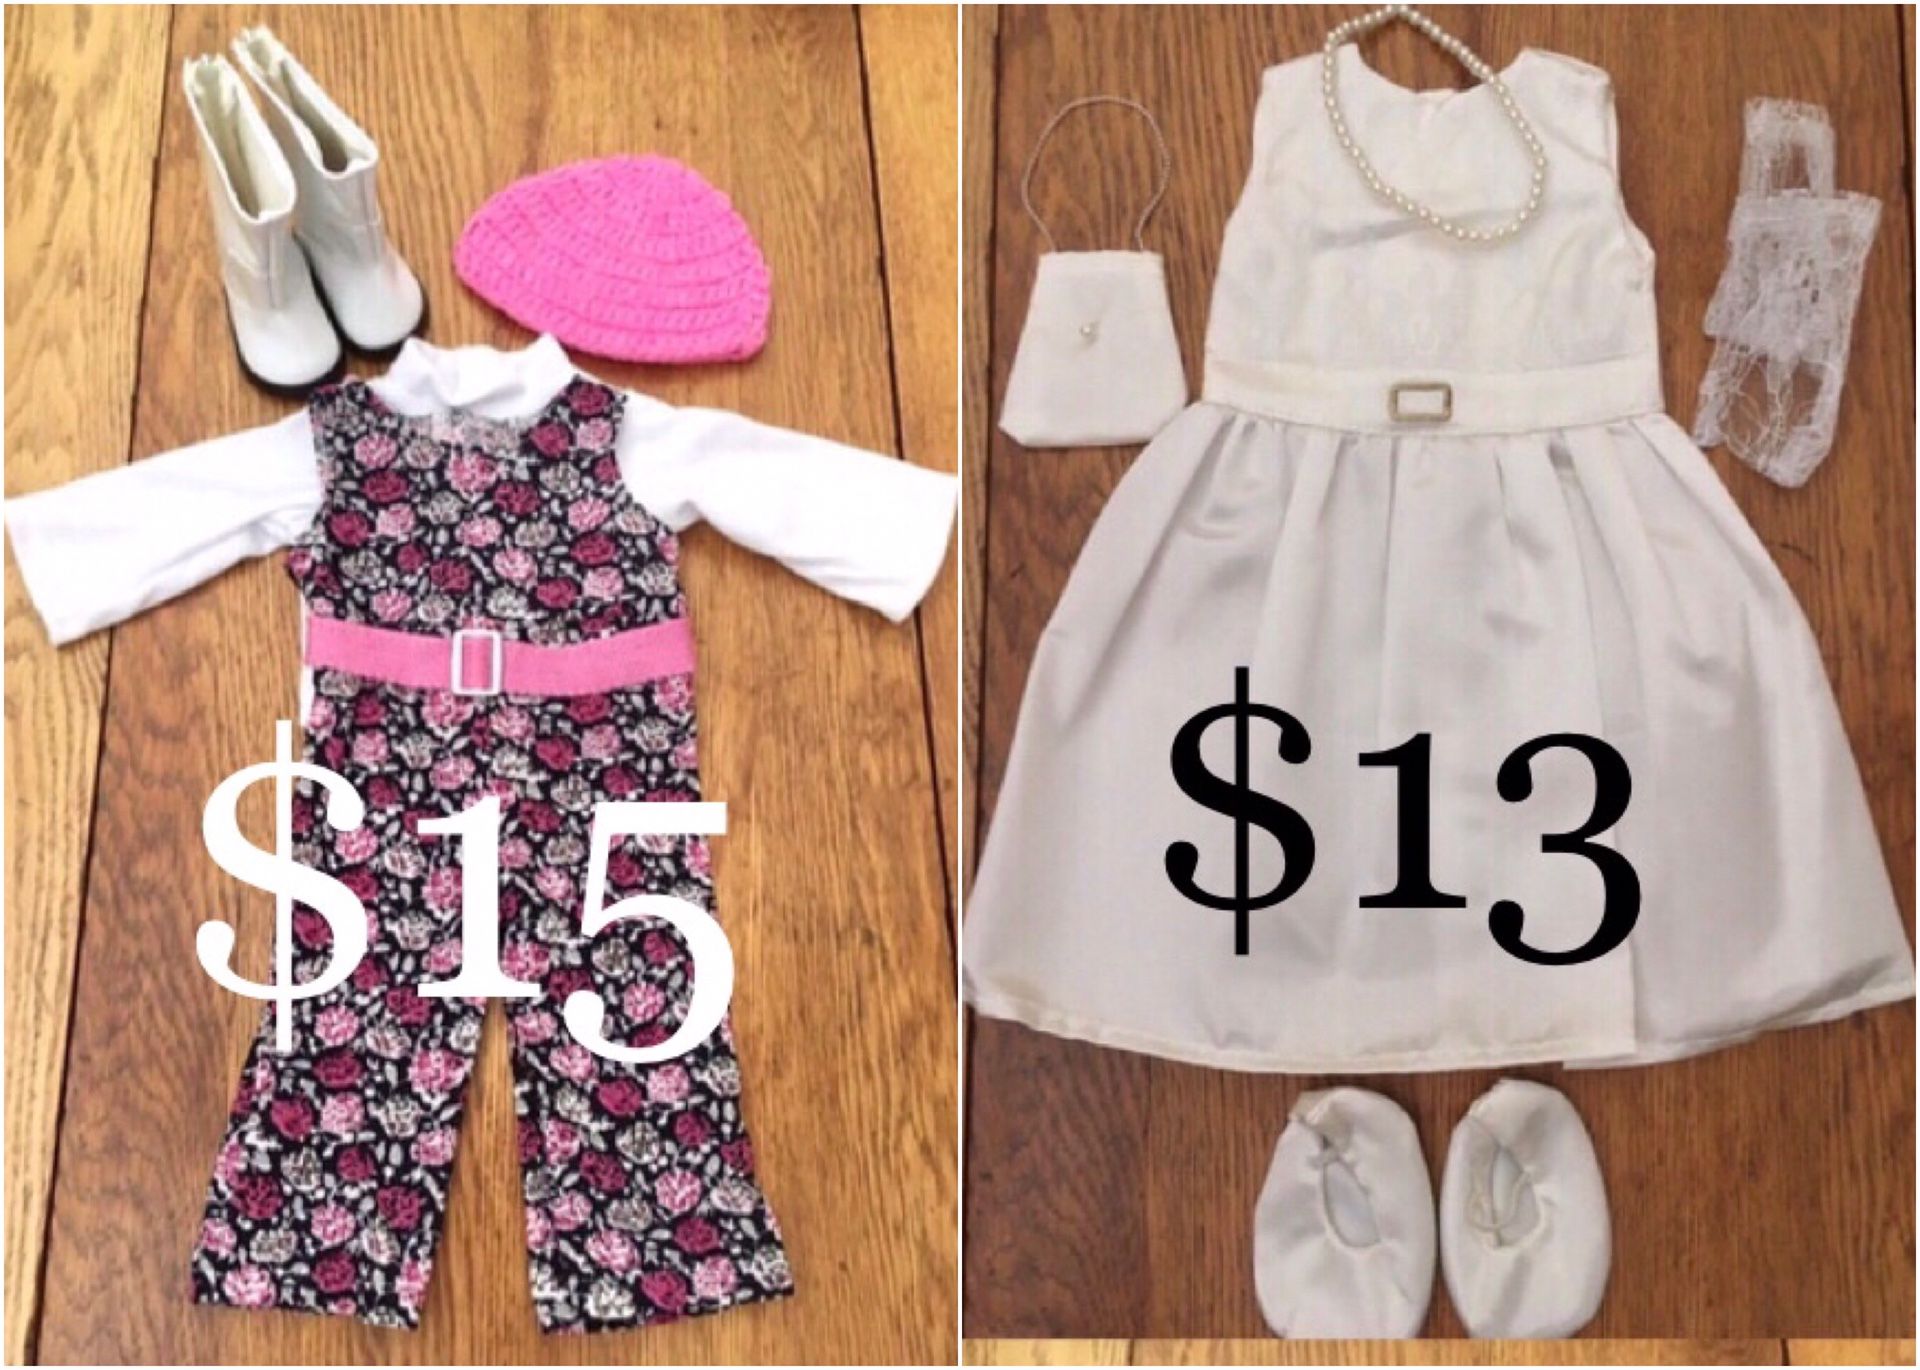 Complete Outfits for 18” Dolls; American Girl, Journey, Battat etc. Queen’s Treasure Brand New! Prices in Photo #1